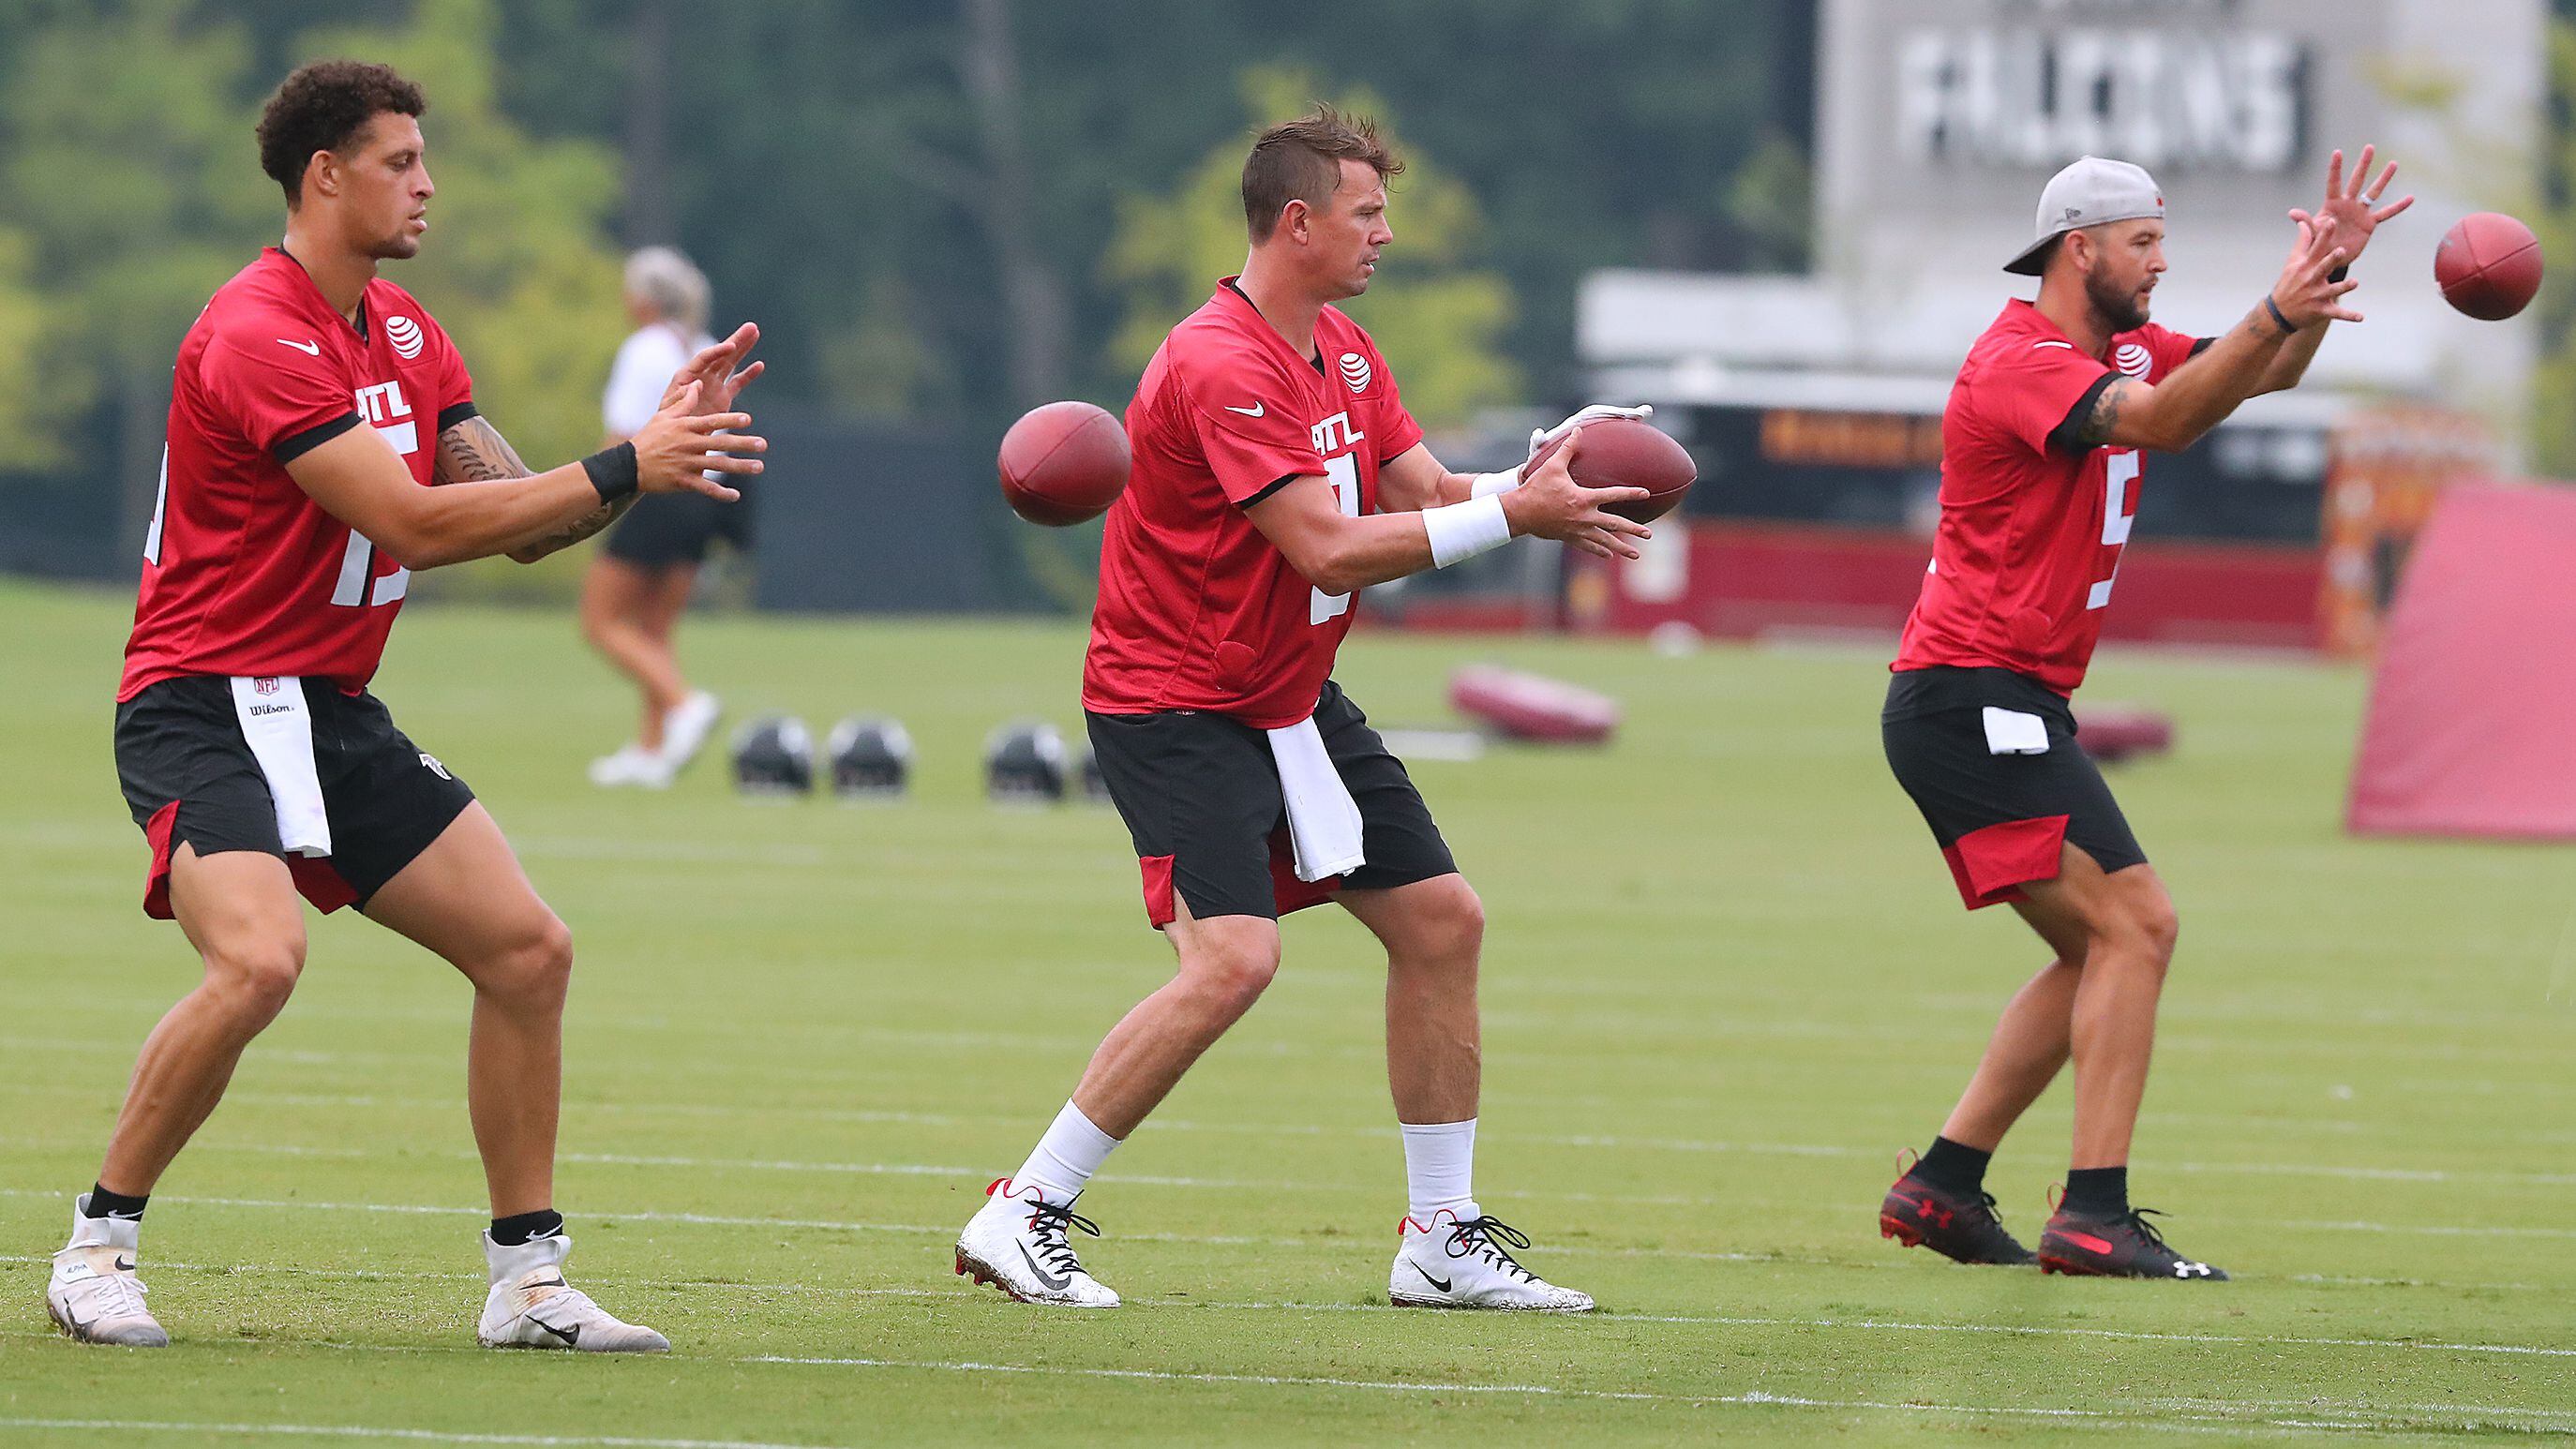 Photos: Second day of practice at Falcons training camp